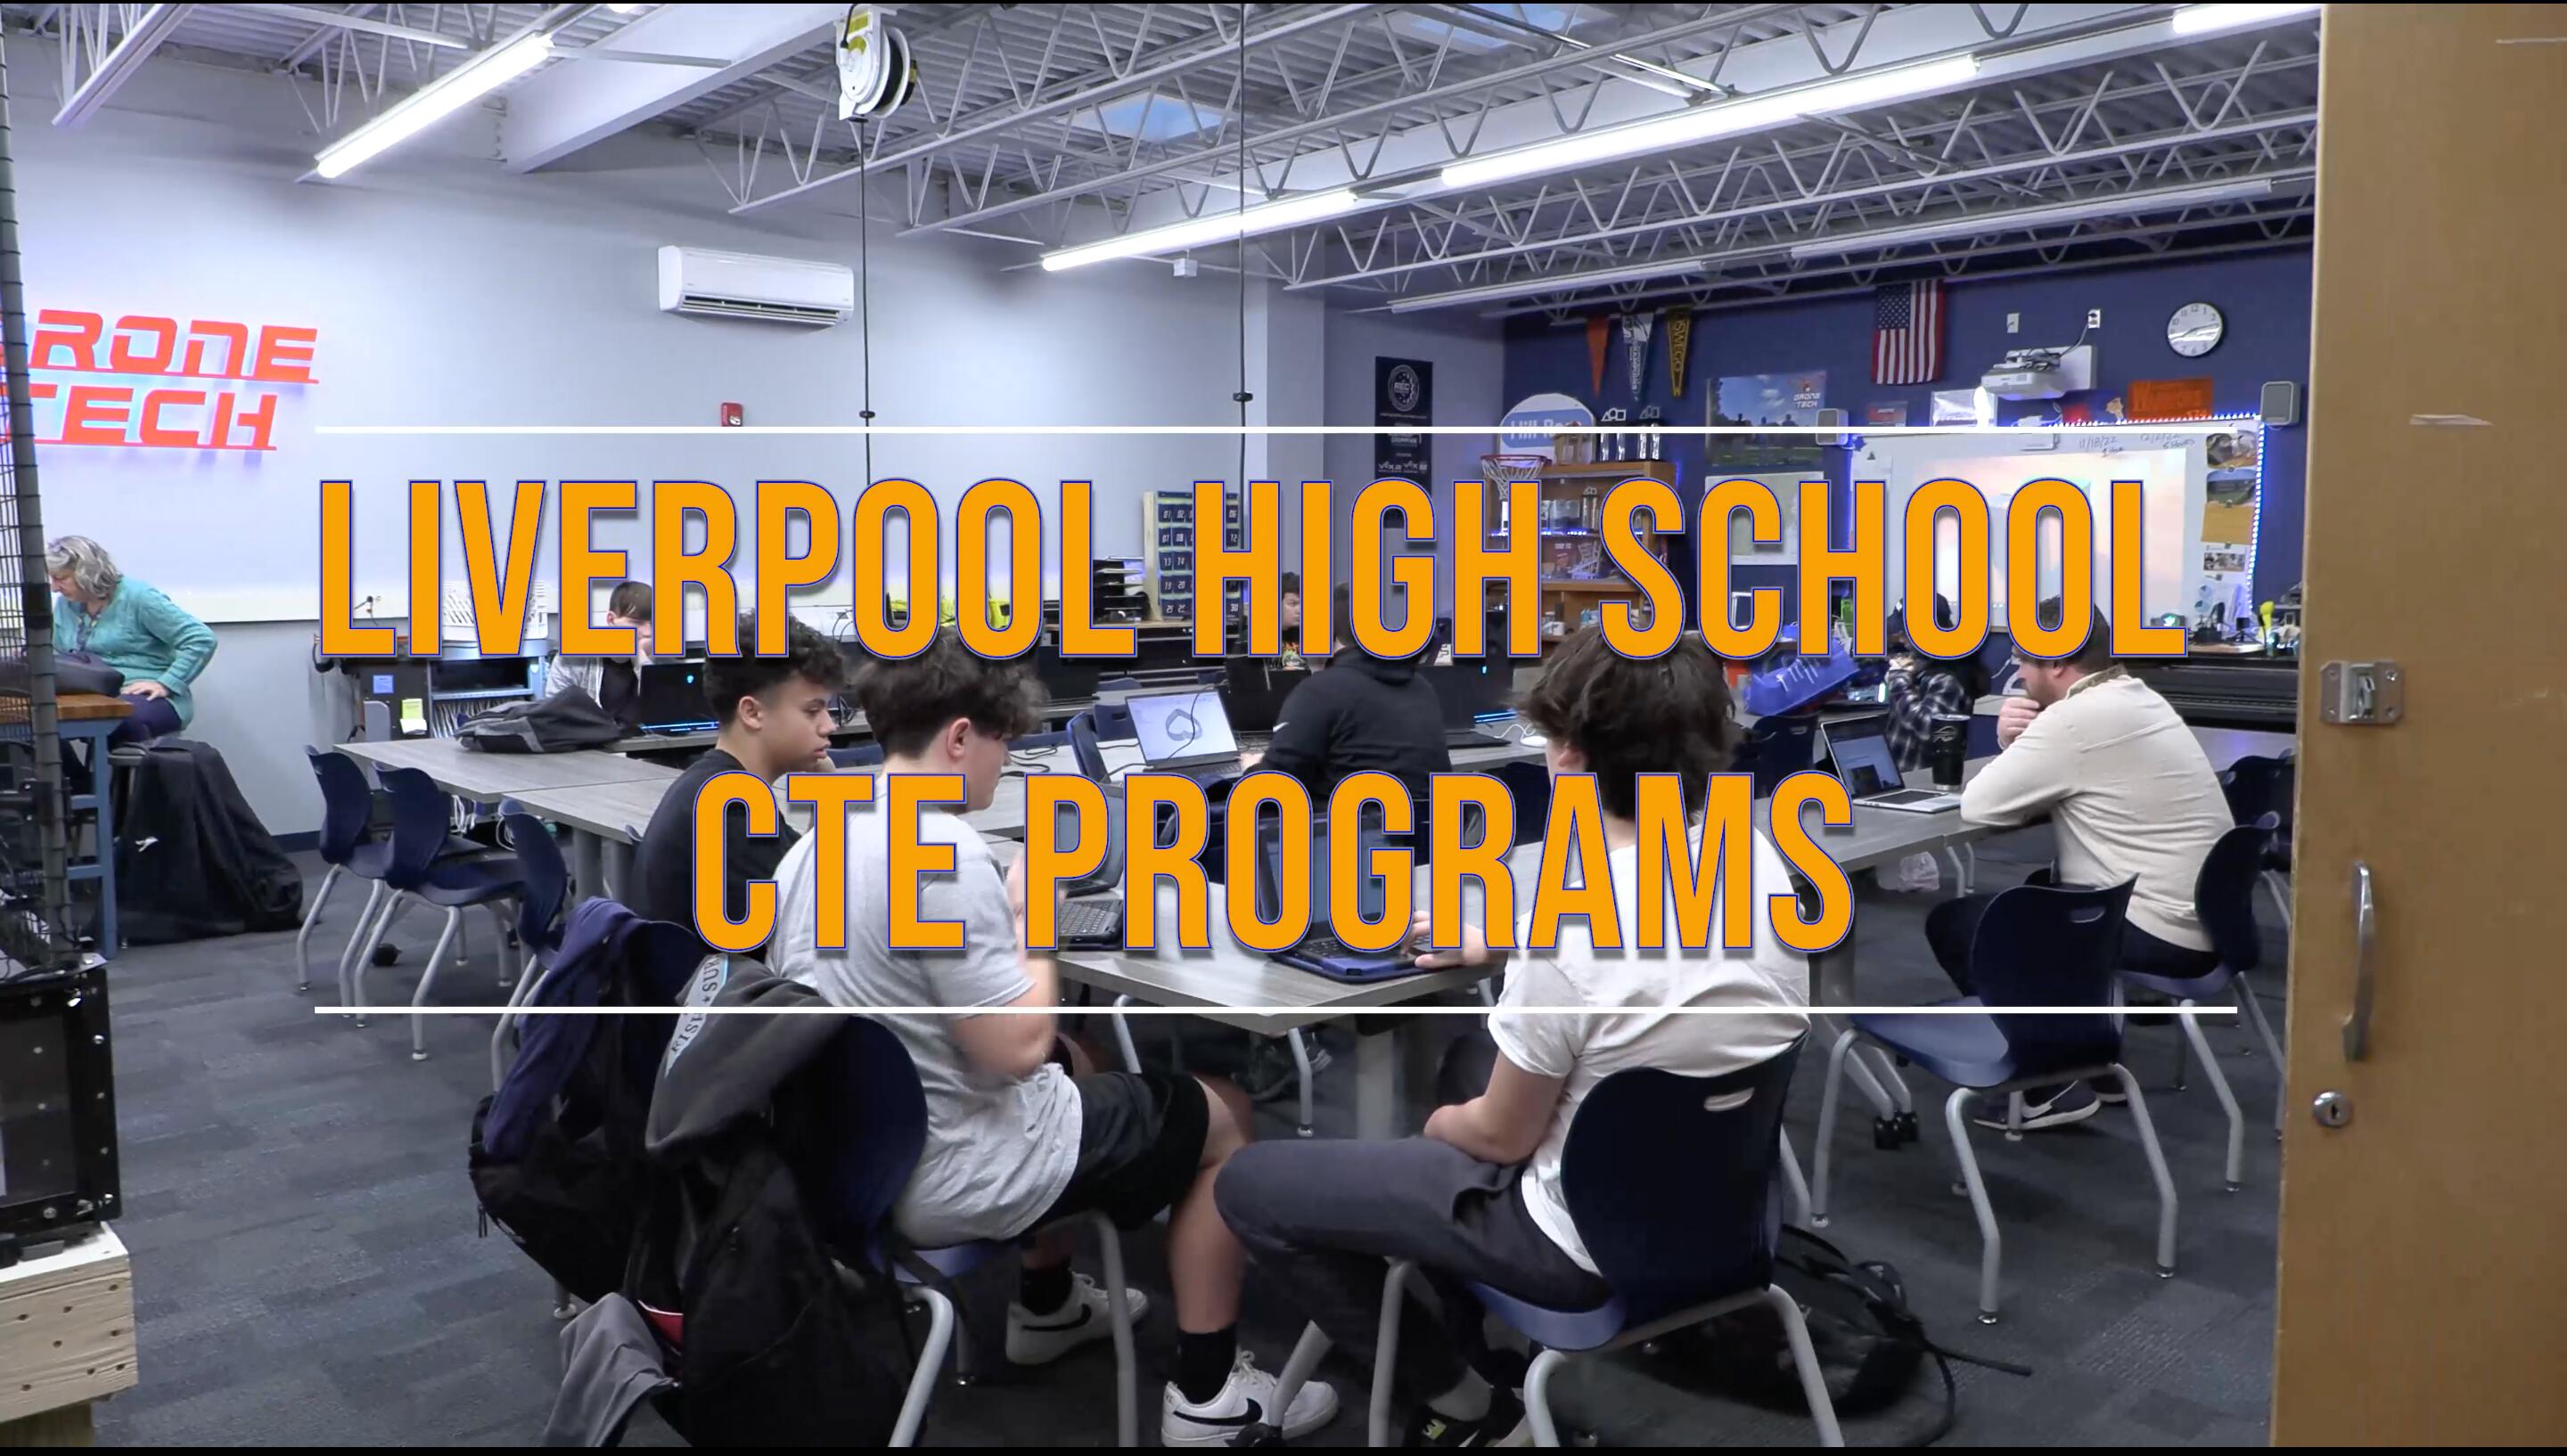 Watch a trailer outlining the CTE Pathways at LHS